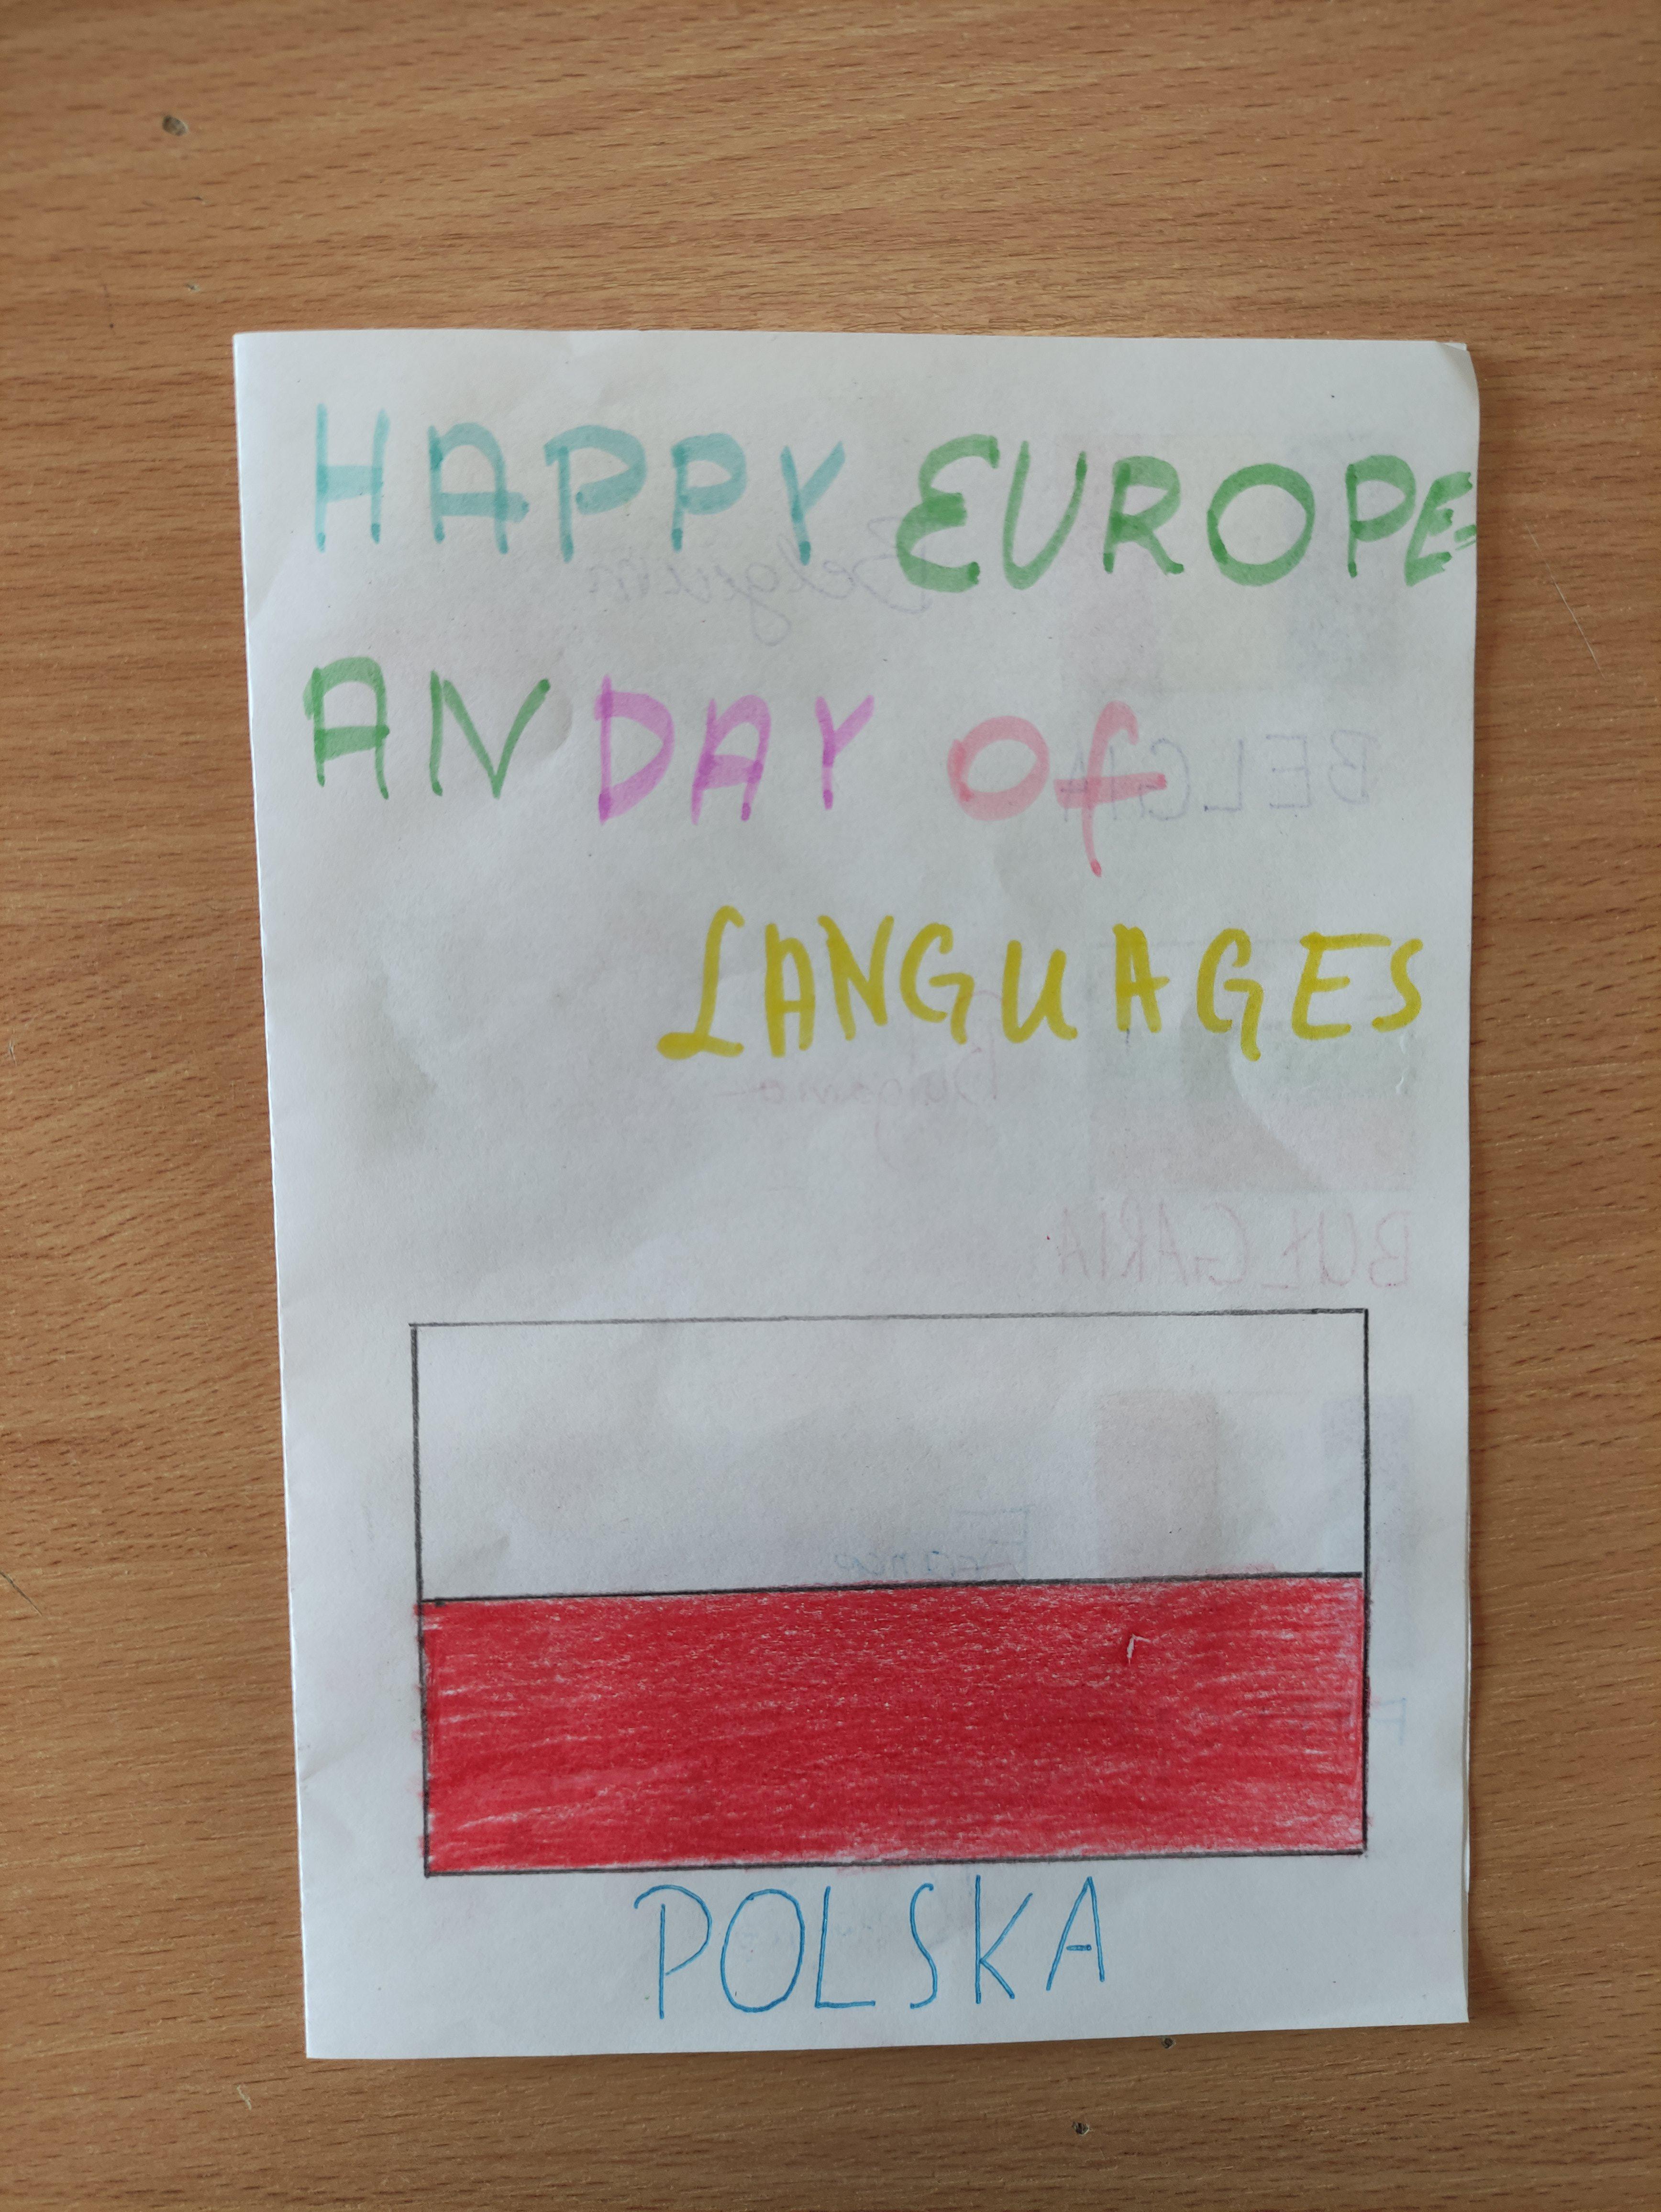 Our European Day of Languages by Edyta - Illustrated by Students of 4th, 5th, 7th, 8th grades - Ourboox.com